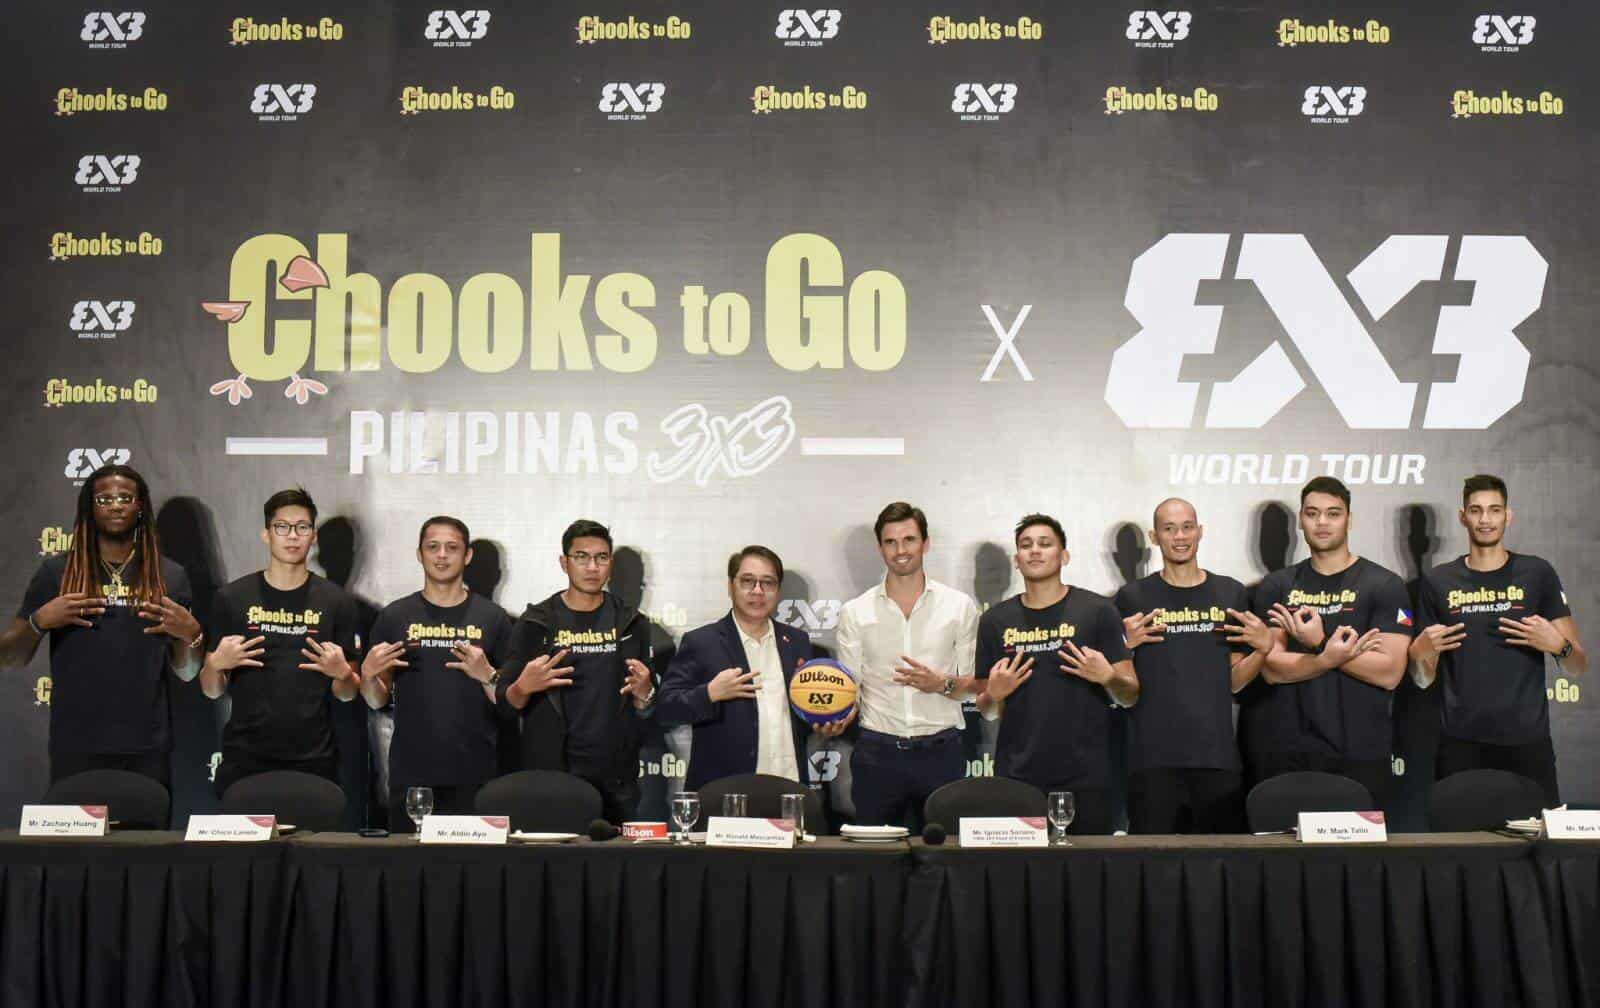 A group of basketball players posing for a picture at the Chooks-to-Go-FIBA 3x3 global partnership.